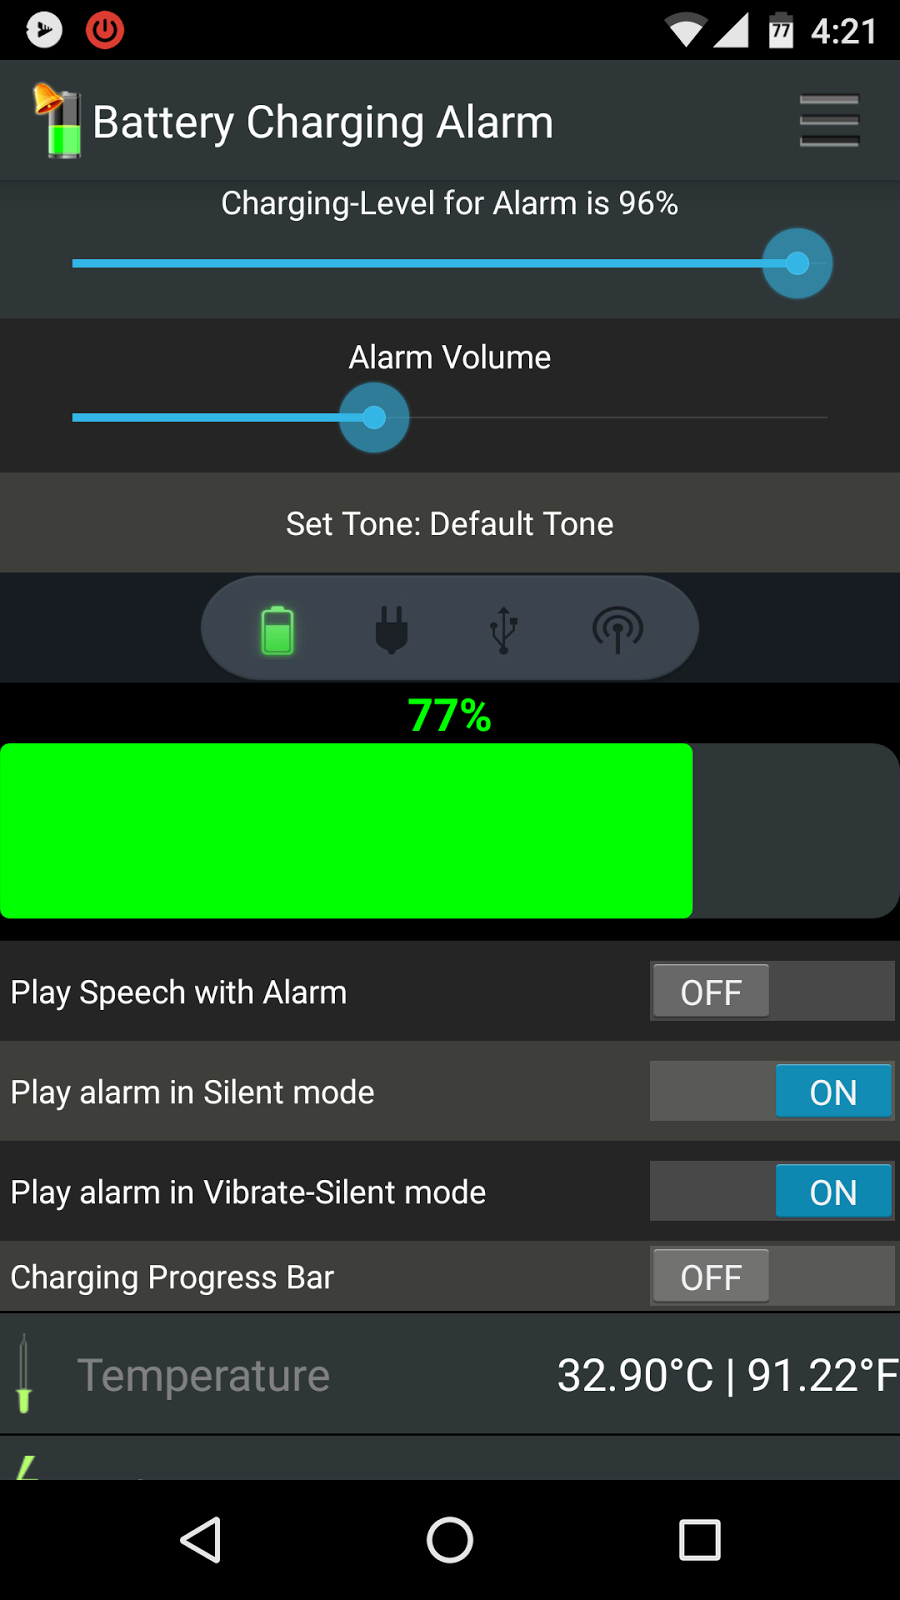 ANDROID:BATTERY CHARGING ALARM App